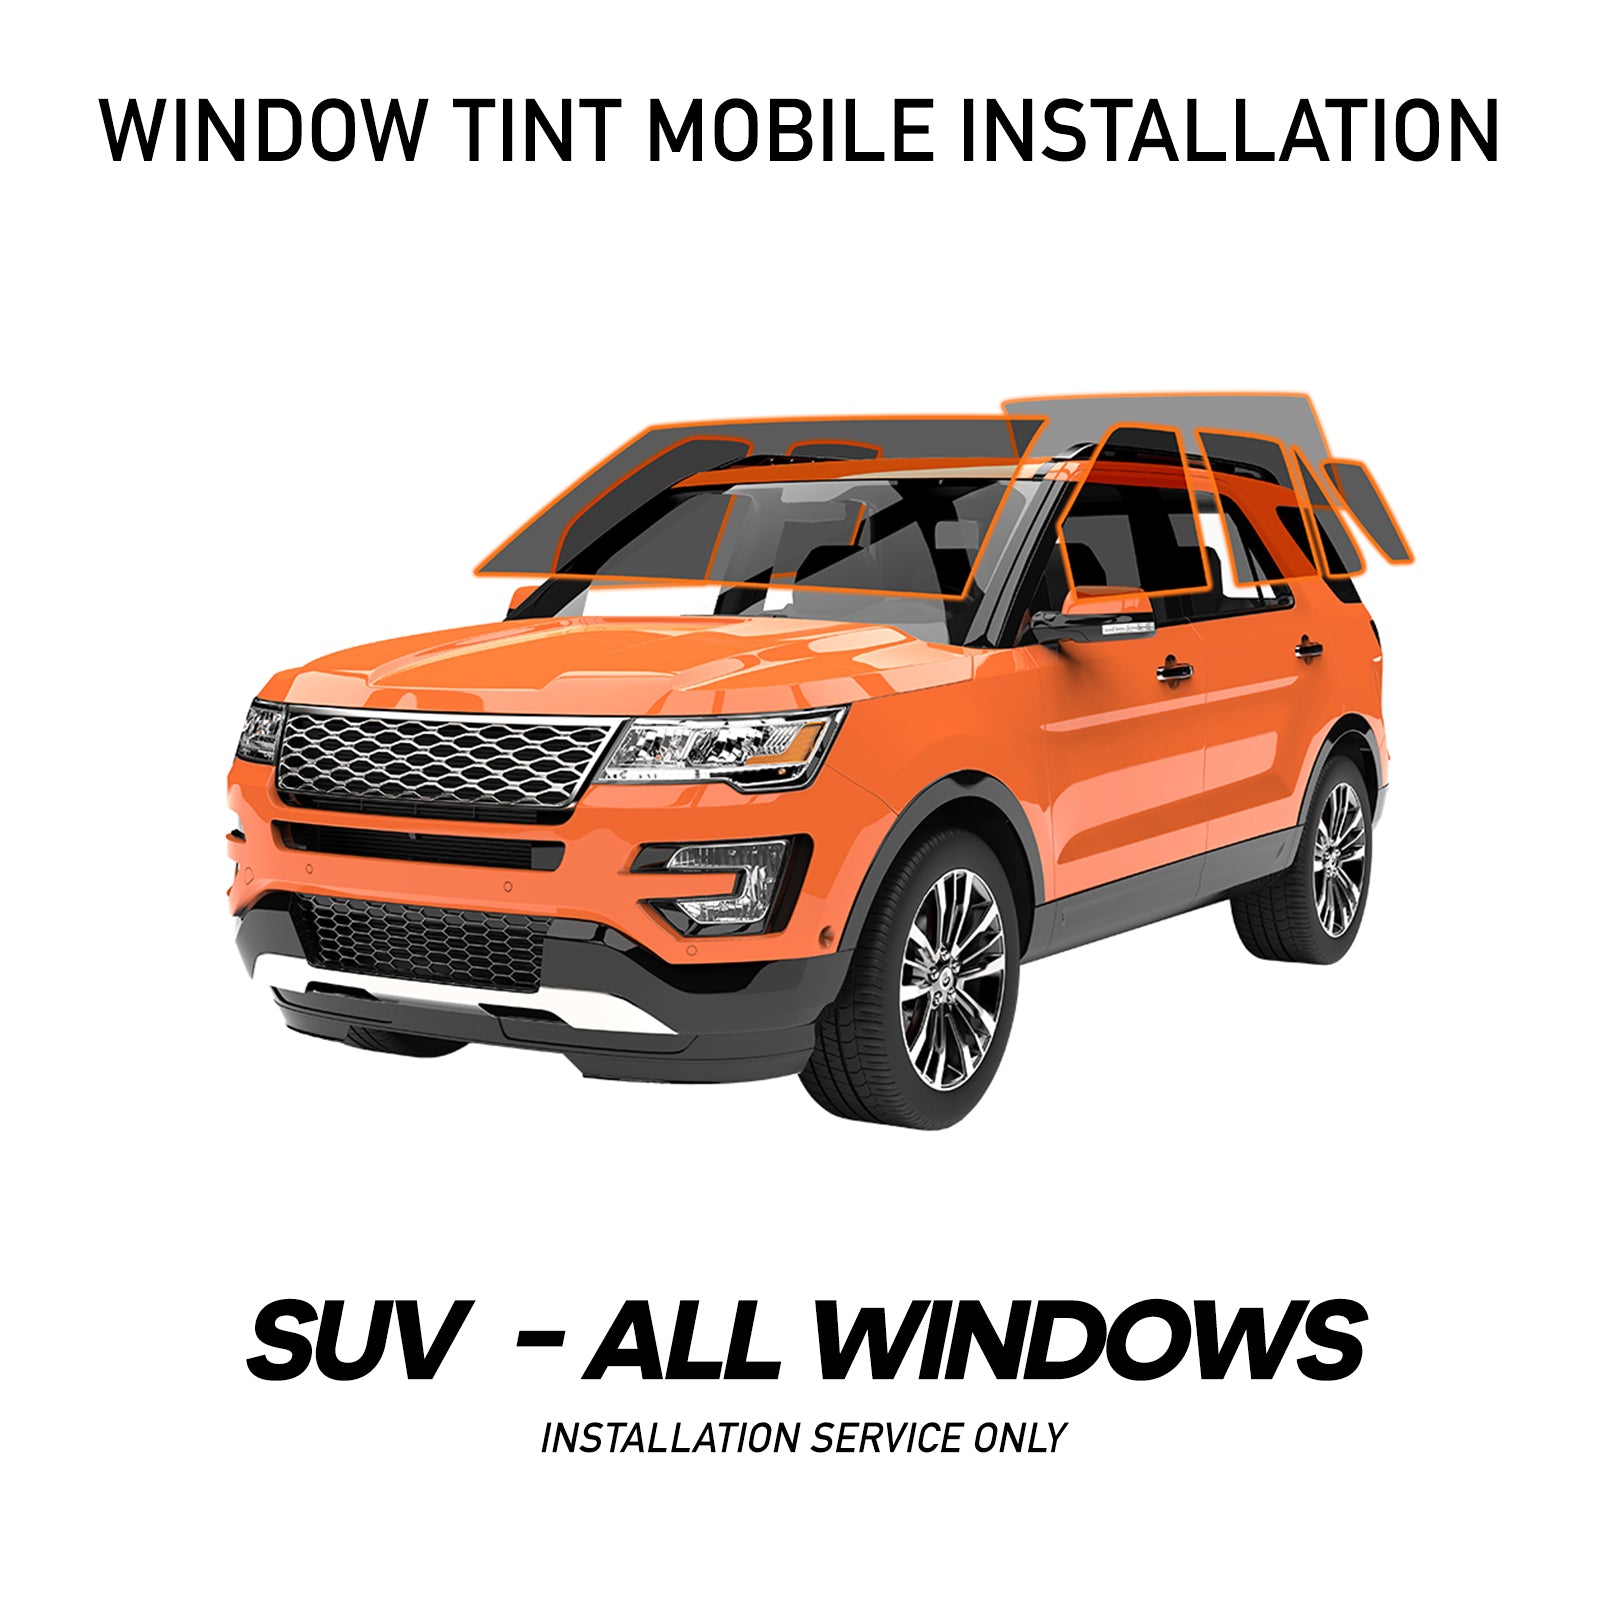 WINDOW TINT MOBILE INSTALLATION FOR SUV ALL WINDOWS 